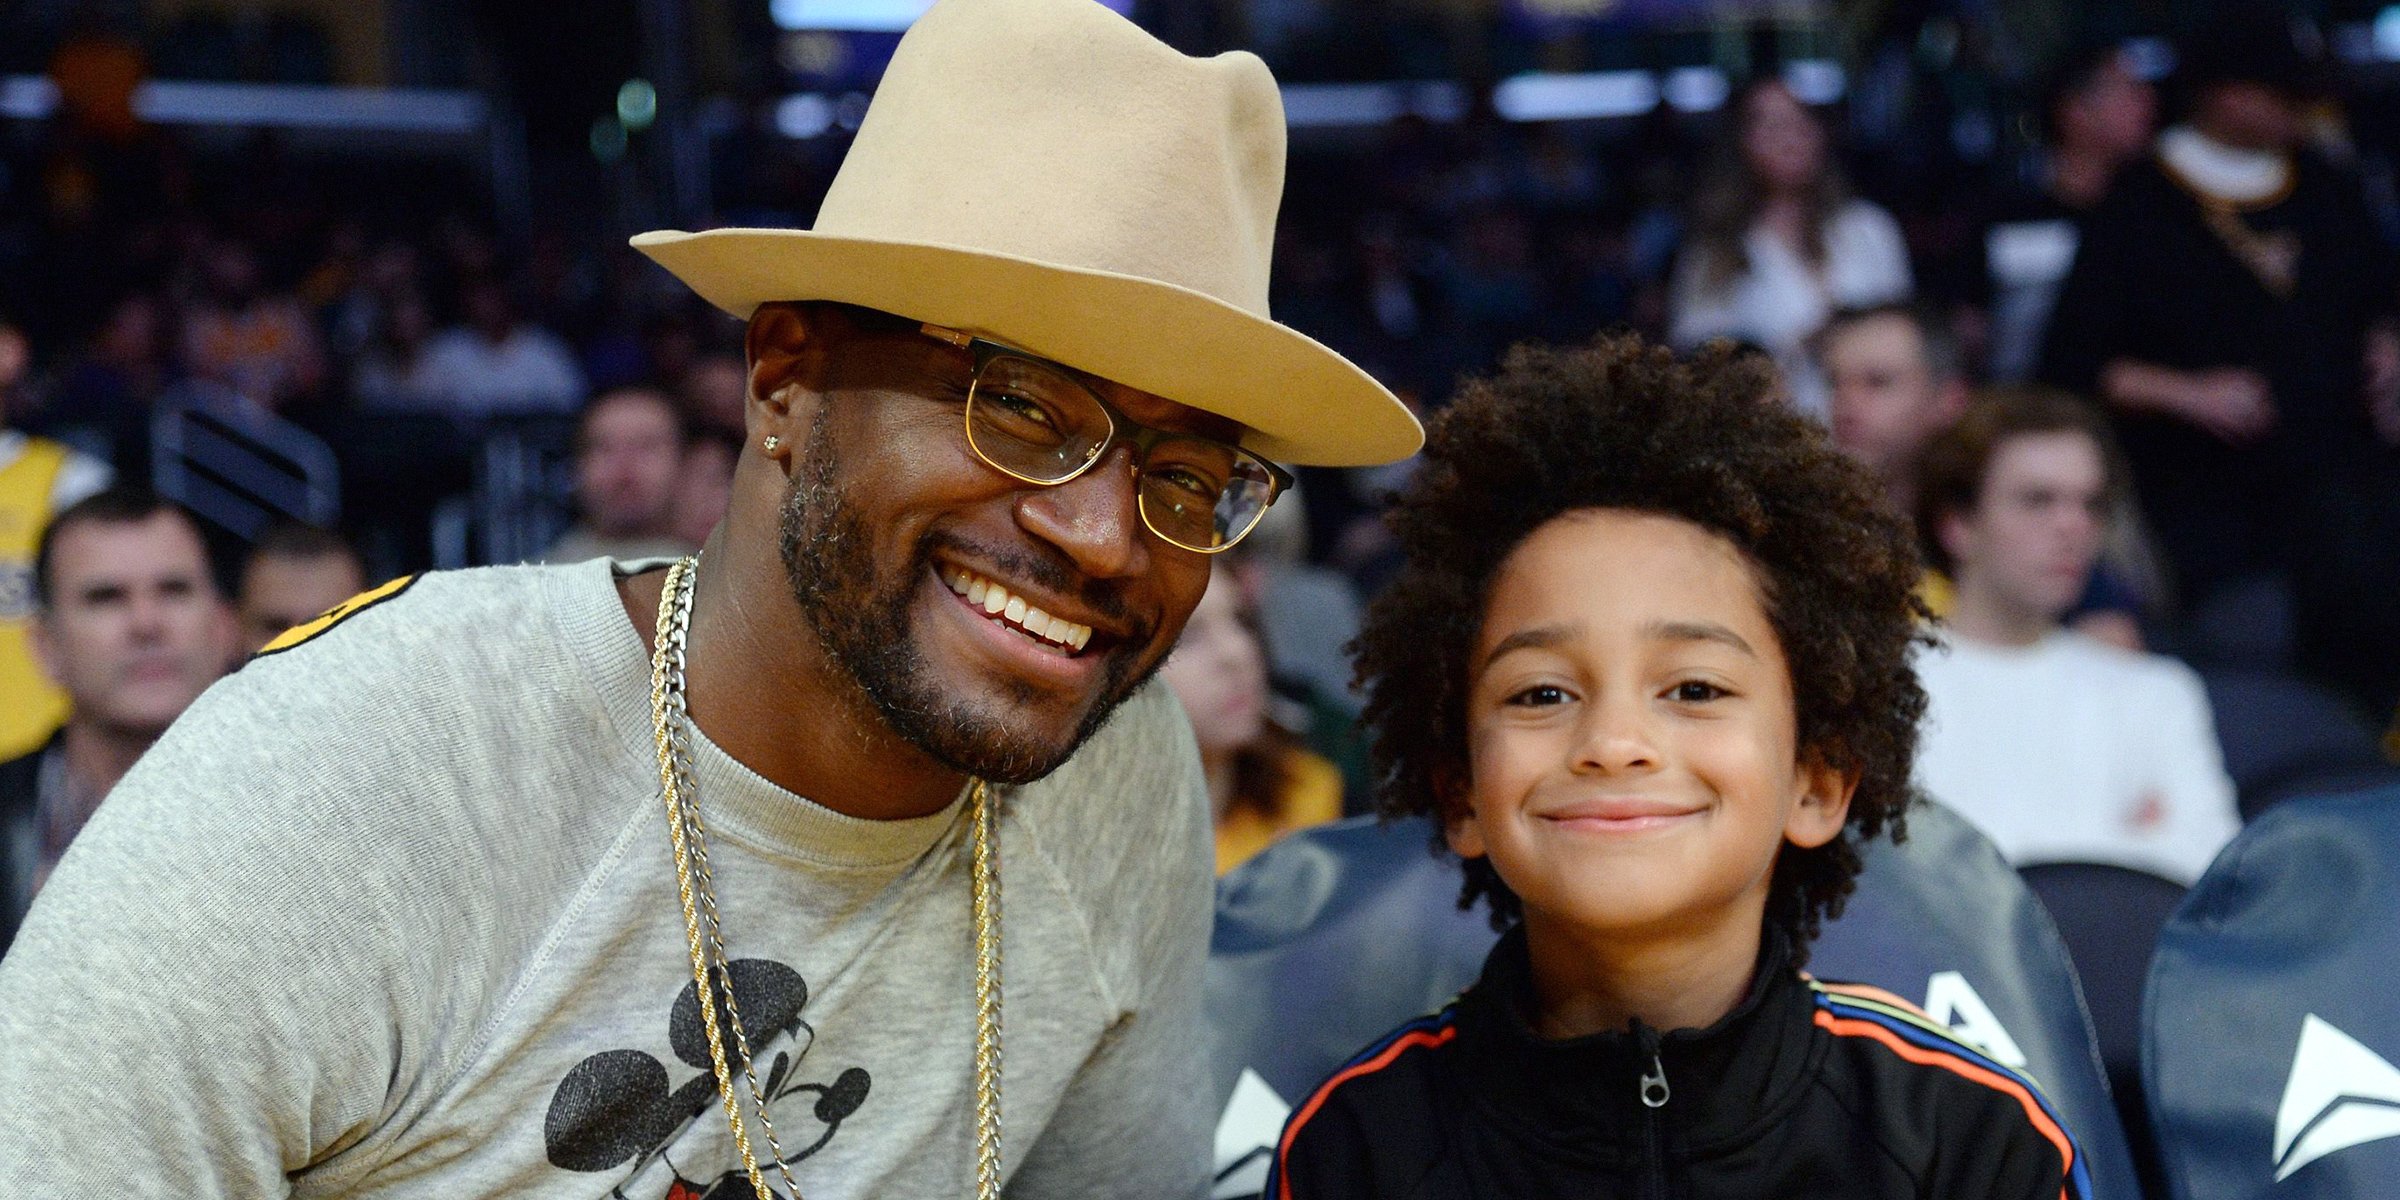 Taye Diggs and Walker Nathaniel | Source: Getty Images